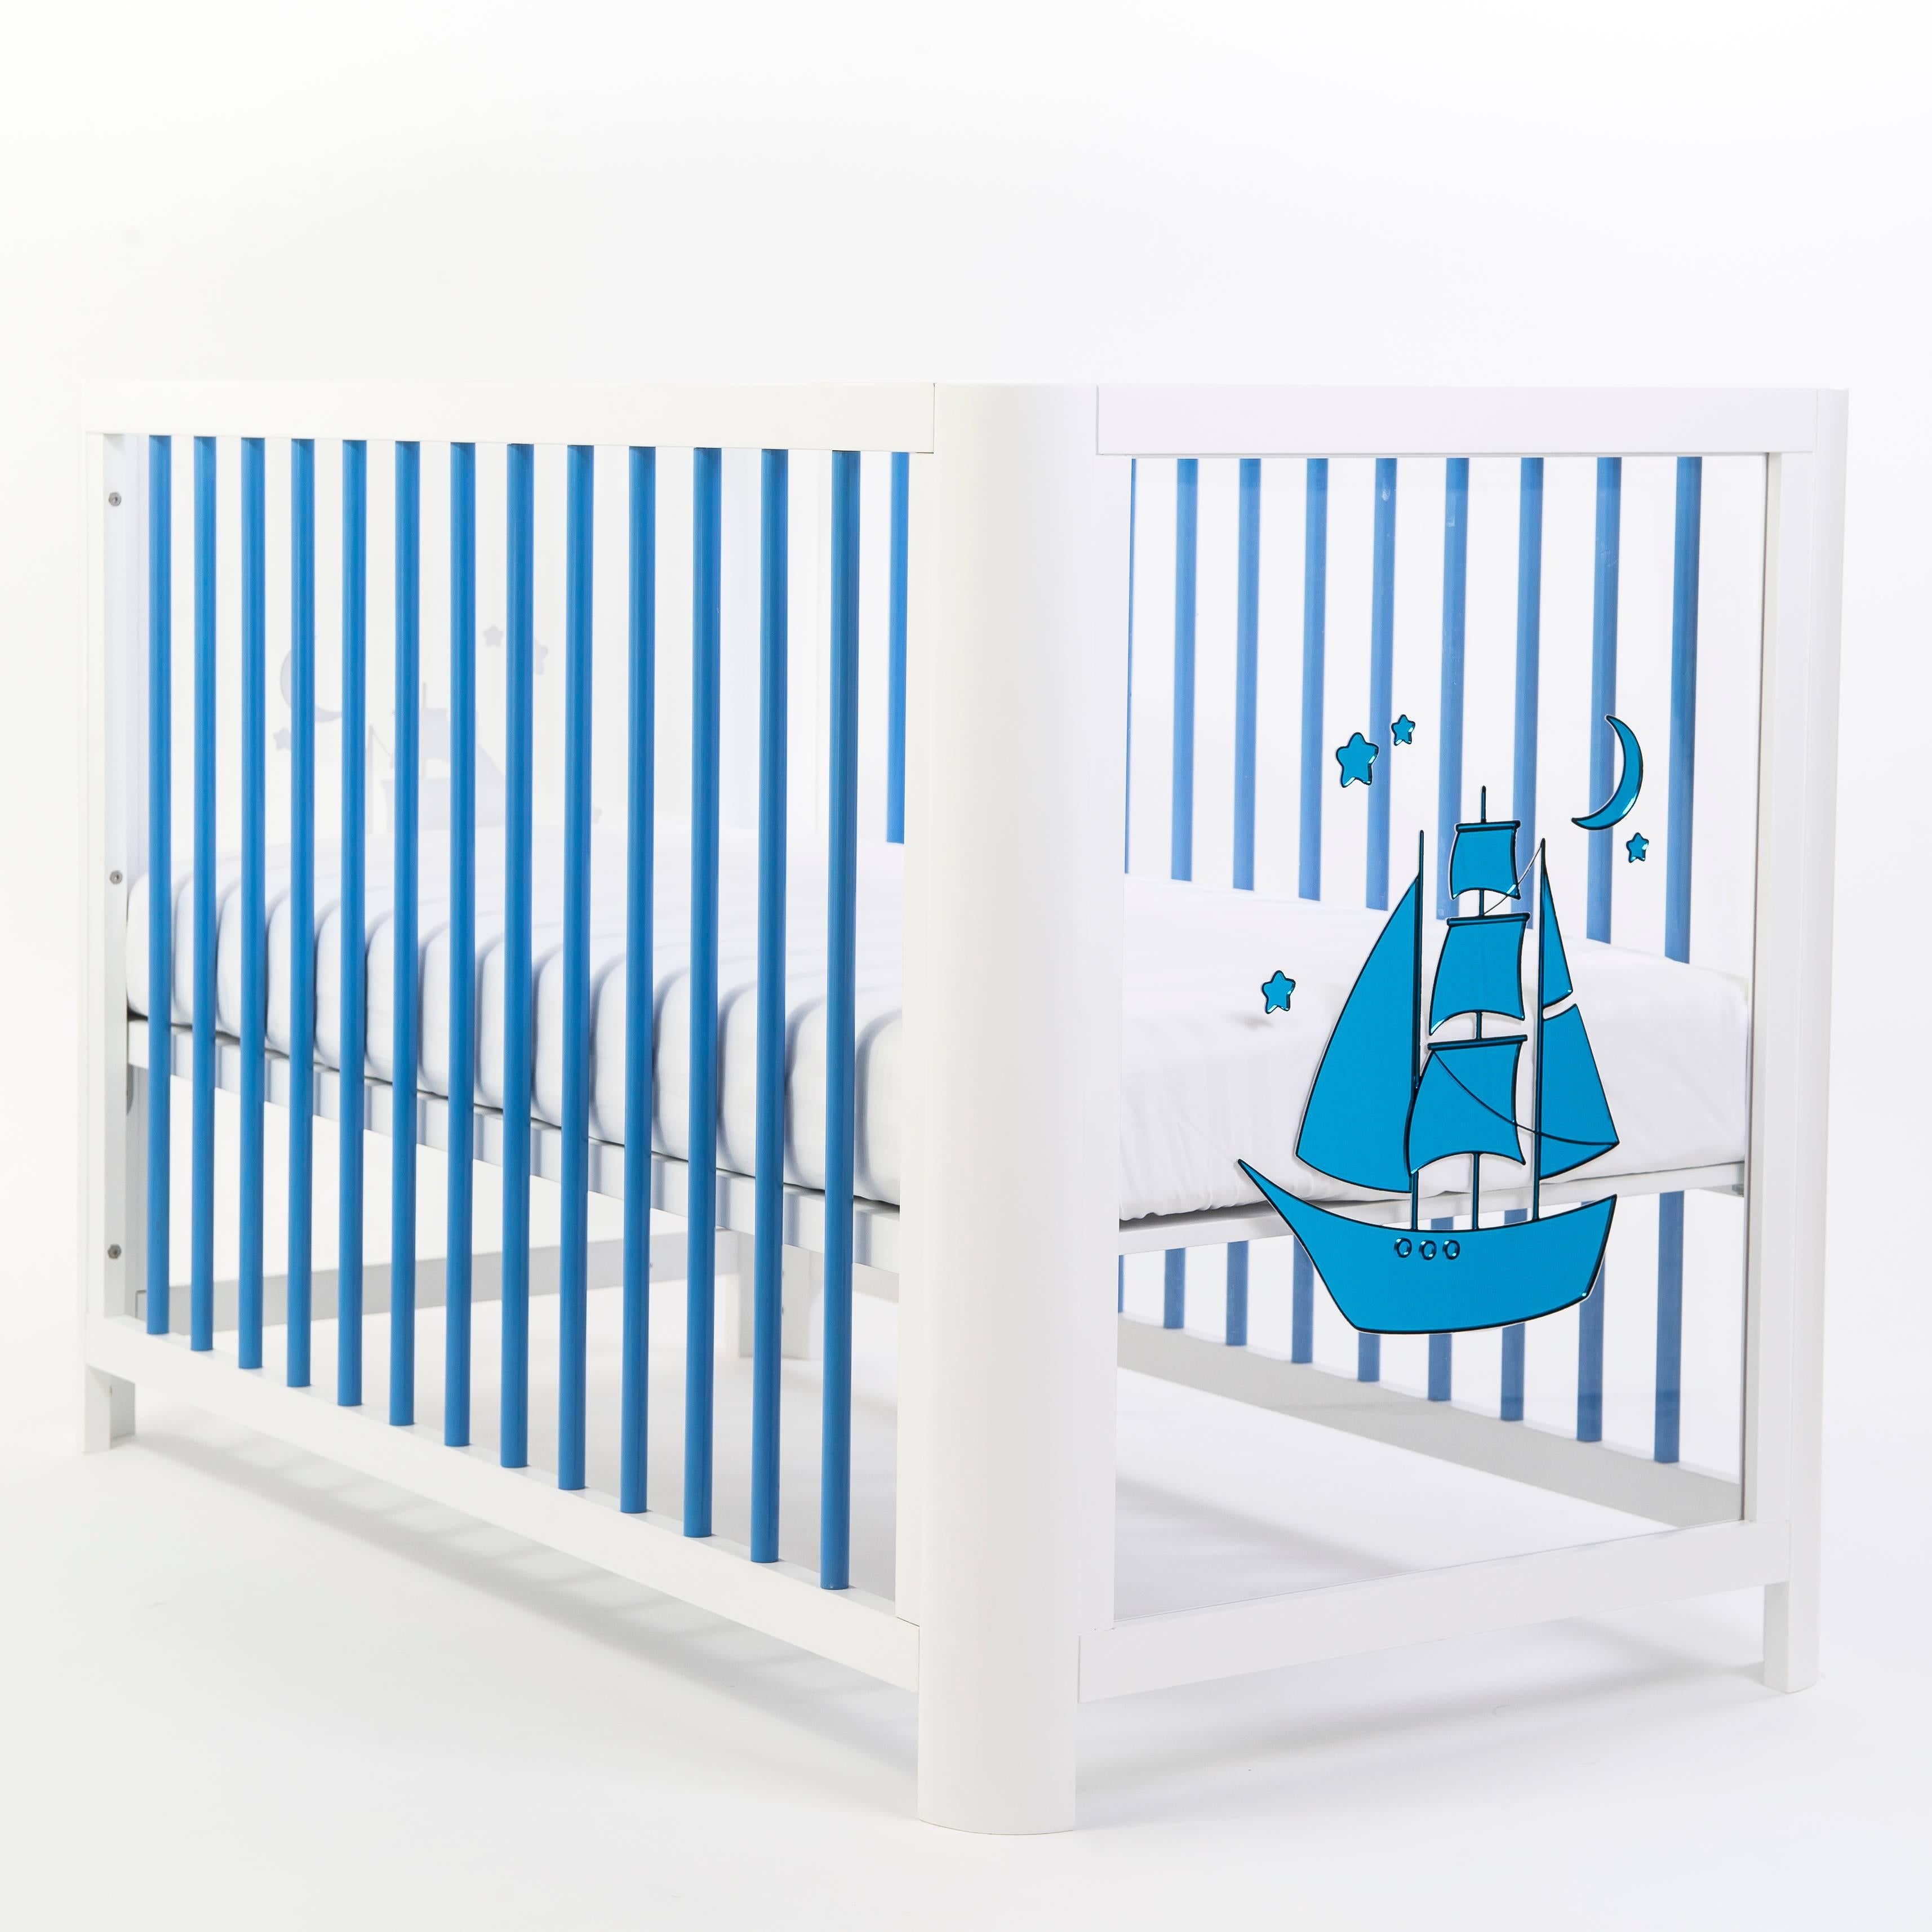 A new breath of air in the nursery that shines in mirrored blue, surrounded by a sea of clear and sparkling acrylic can let baby sea outside into the world and you to see inside into your world, and your heart. Built to last, built by hand. Converts